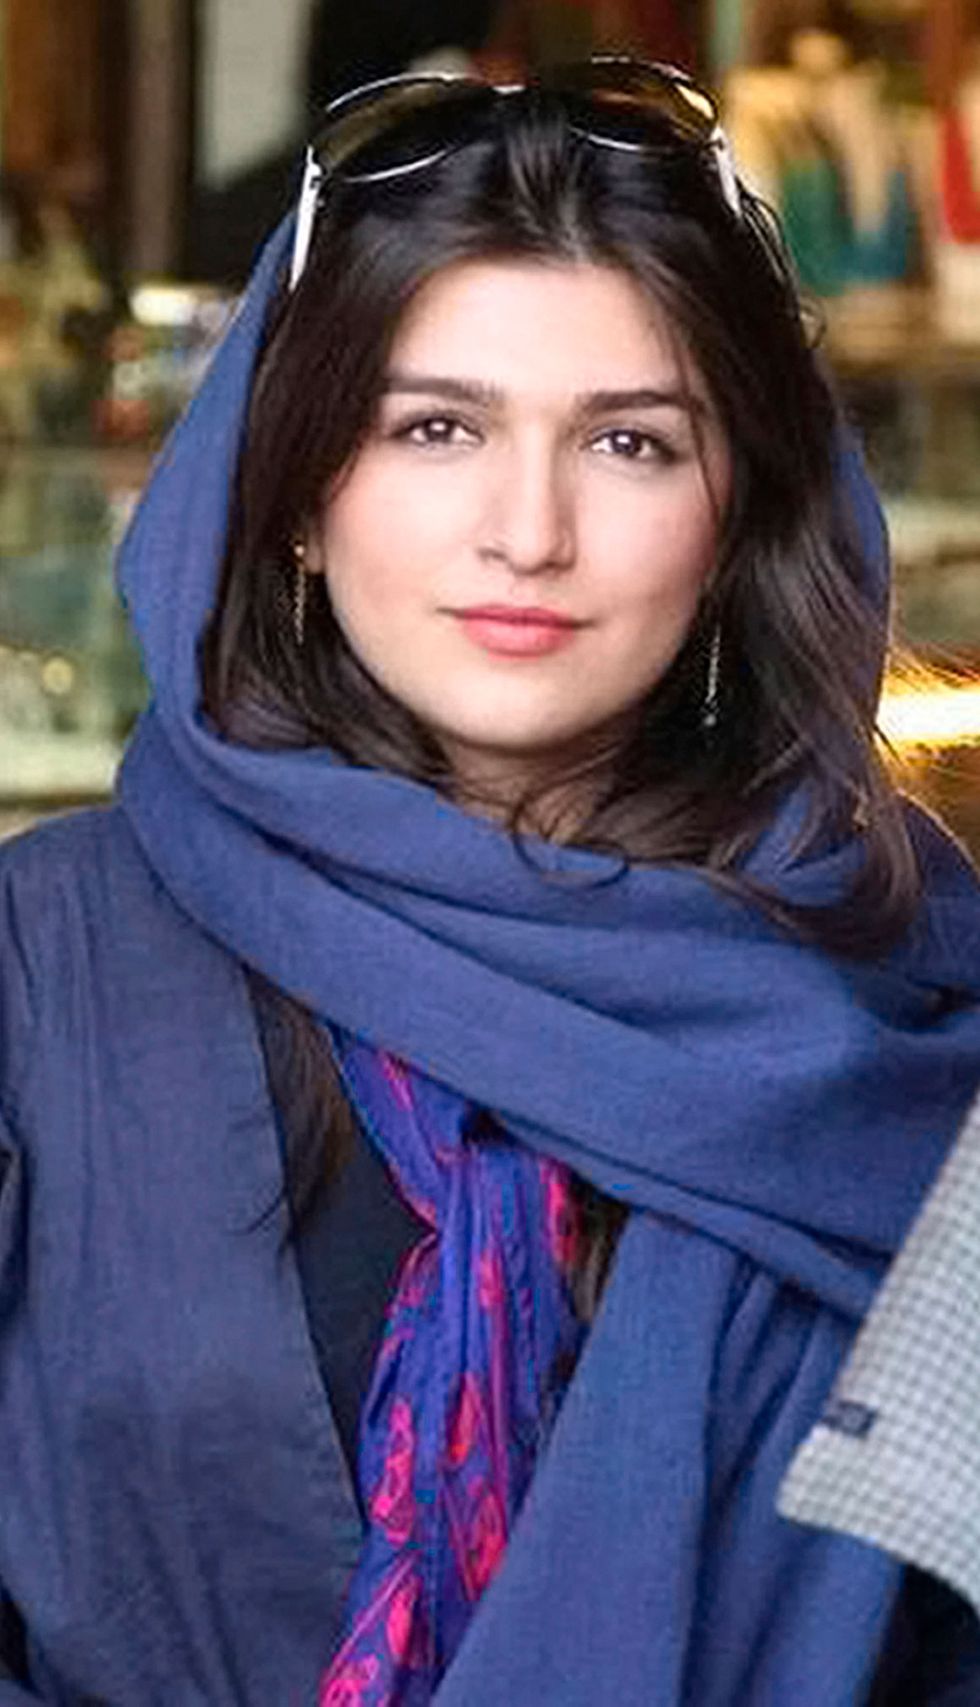 This Iranian woman has been jailed for a year after attending a volleyball game